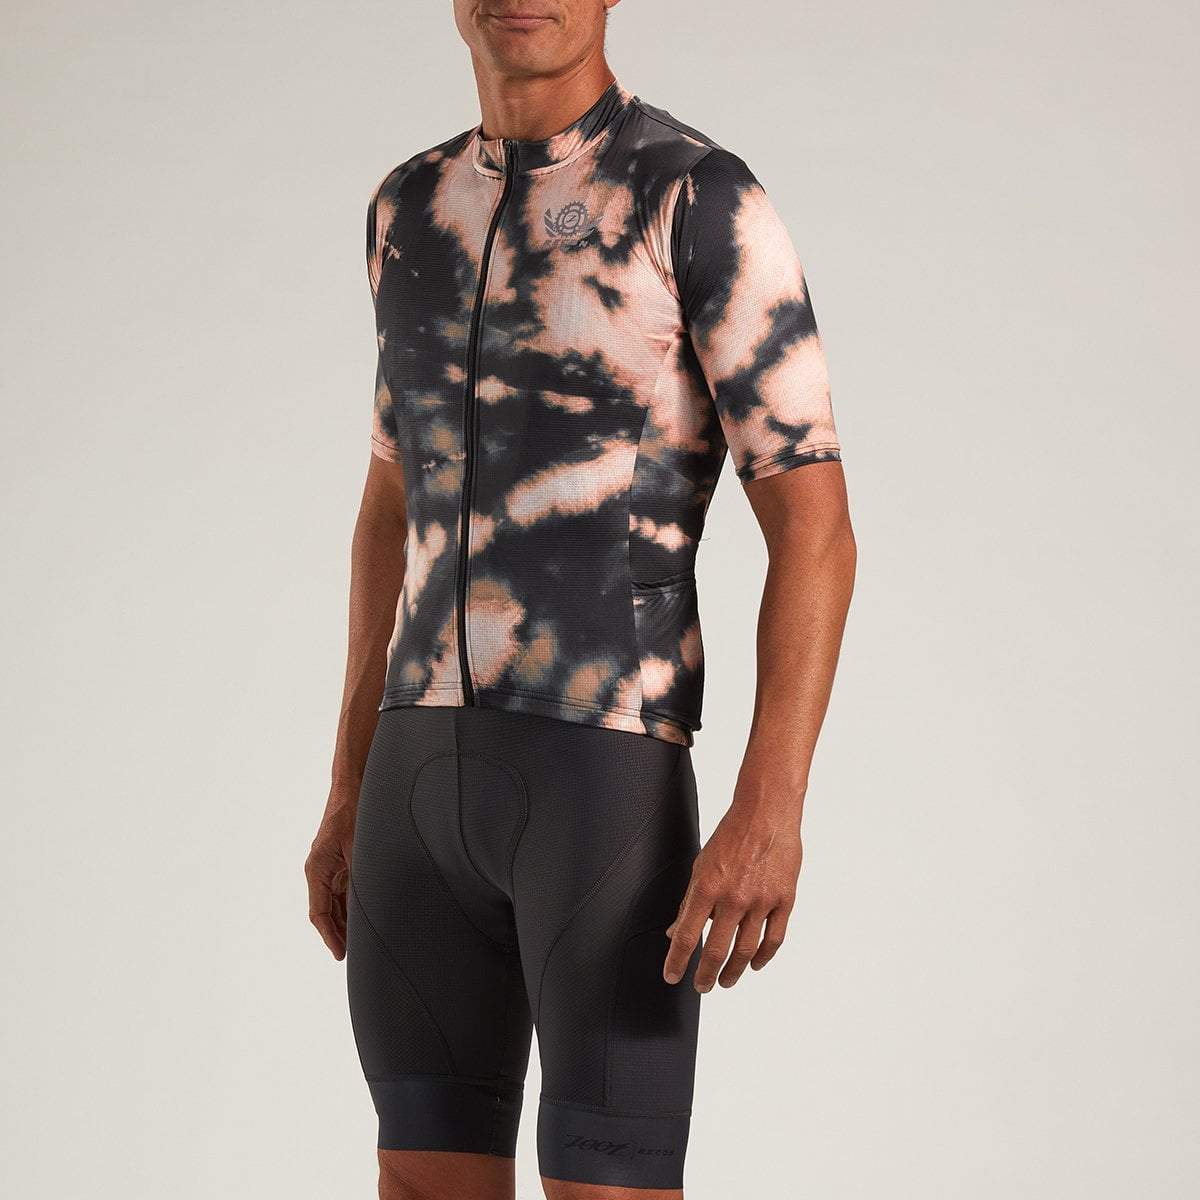 Zoot Sports CYCLE TOPS MENS RECON CYCLE JERSEY - BLEACHED